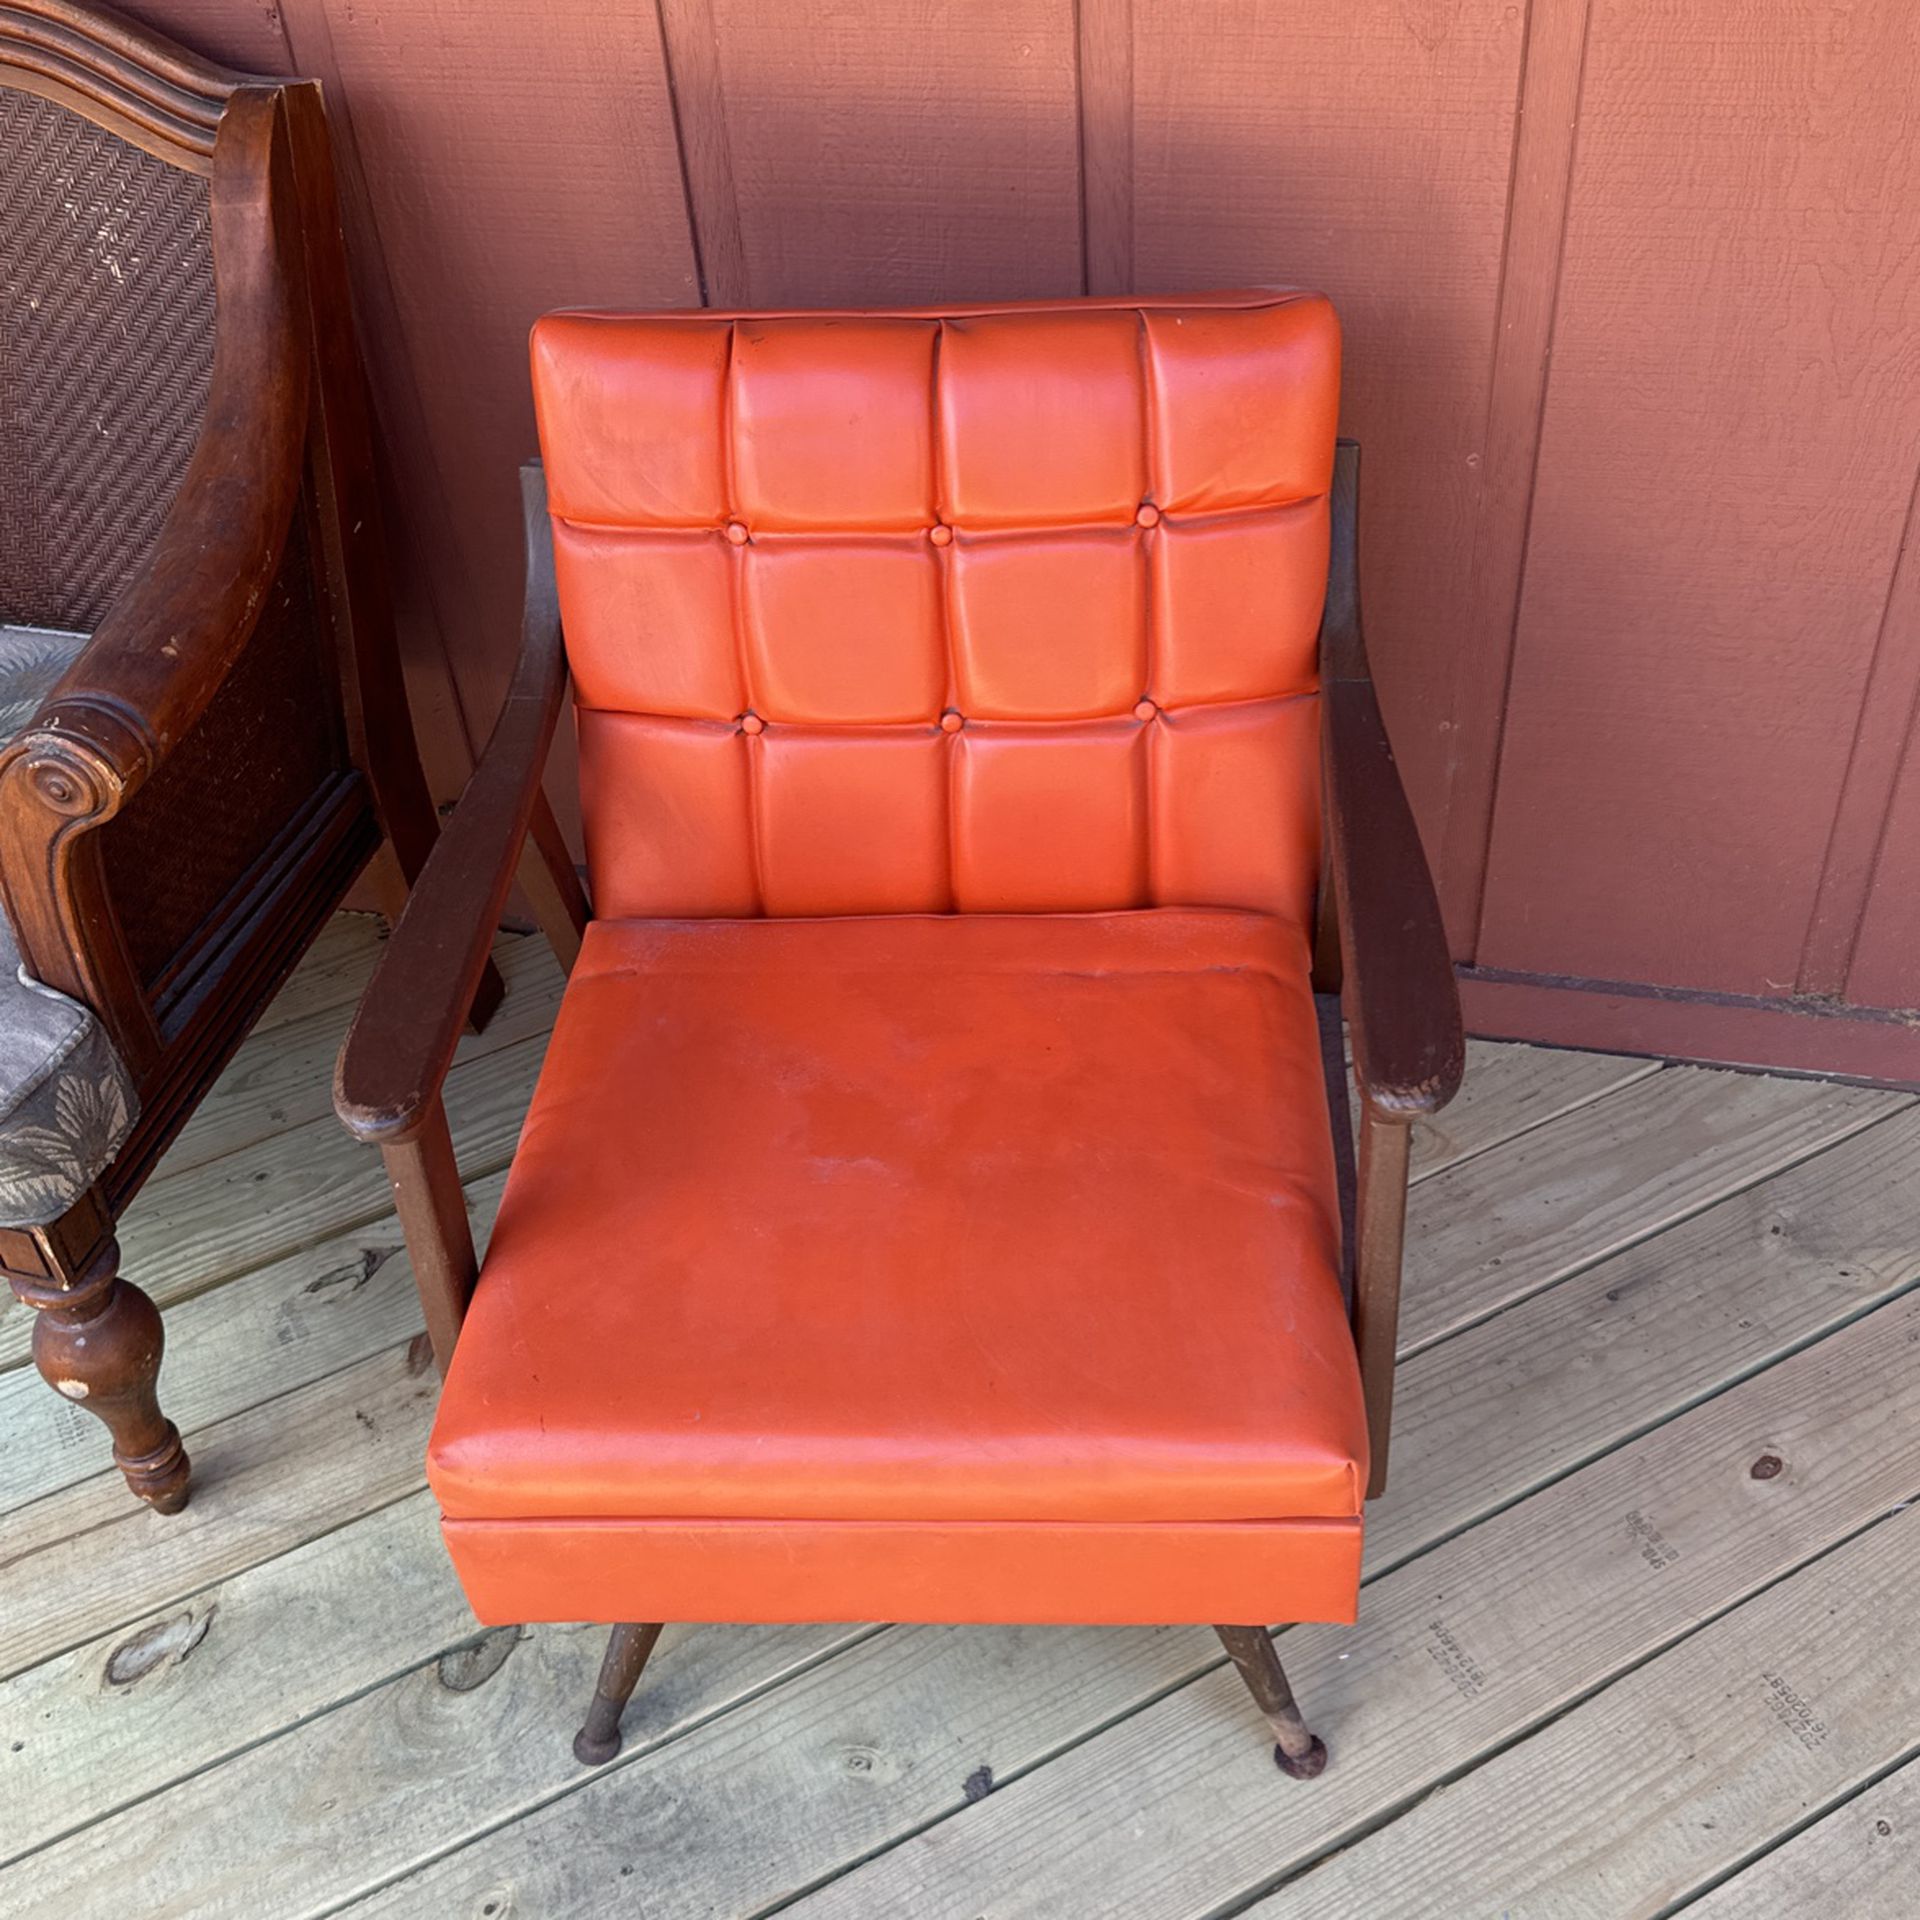 Rocking modern chair, vintage, most likely 60 th